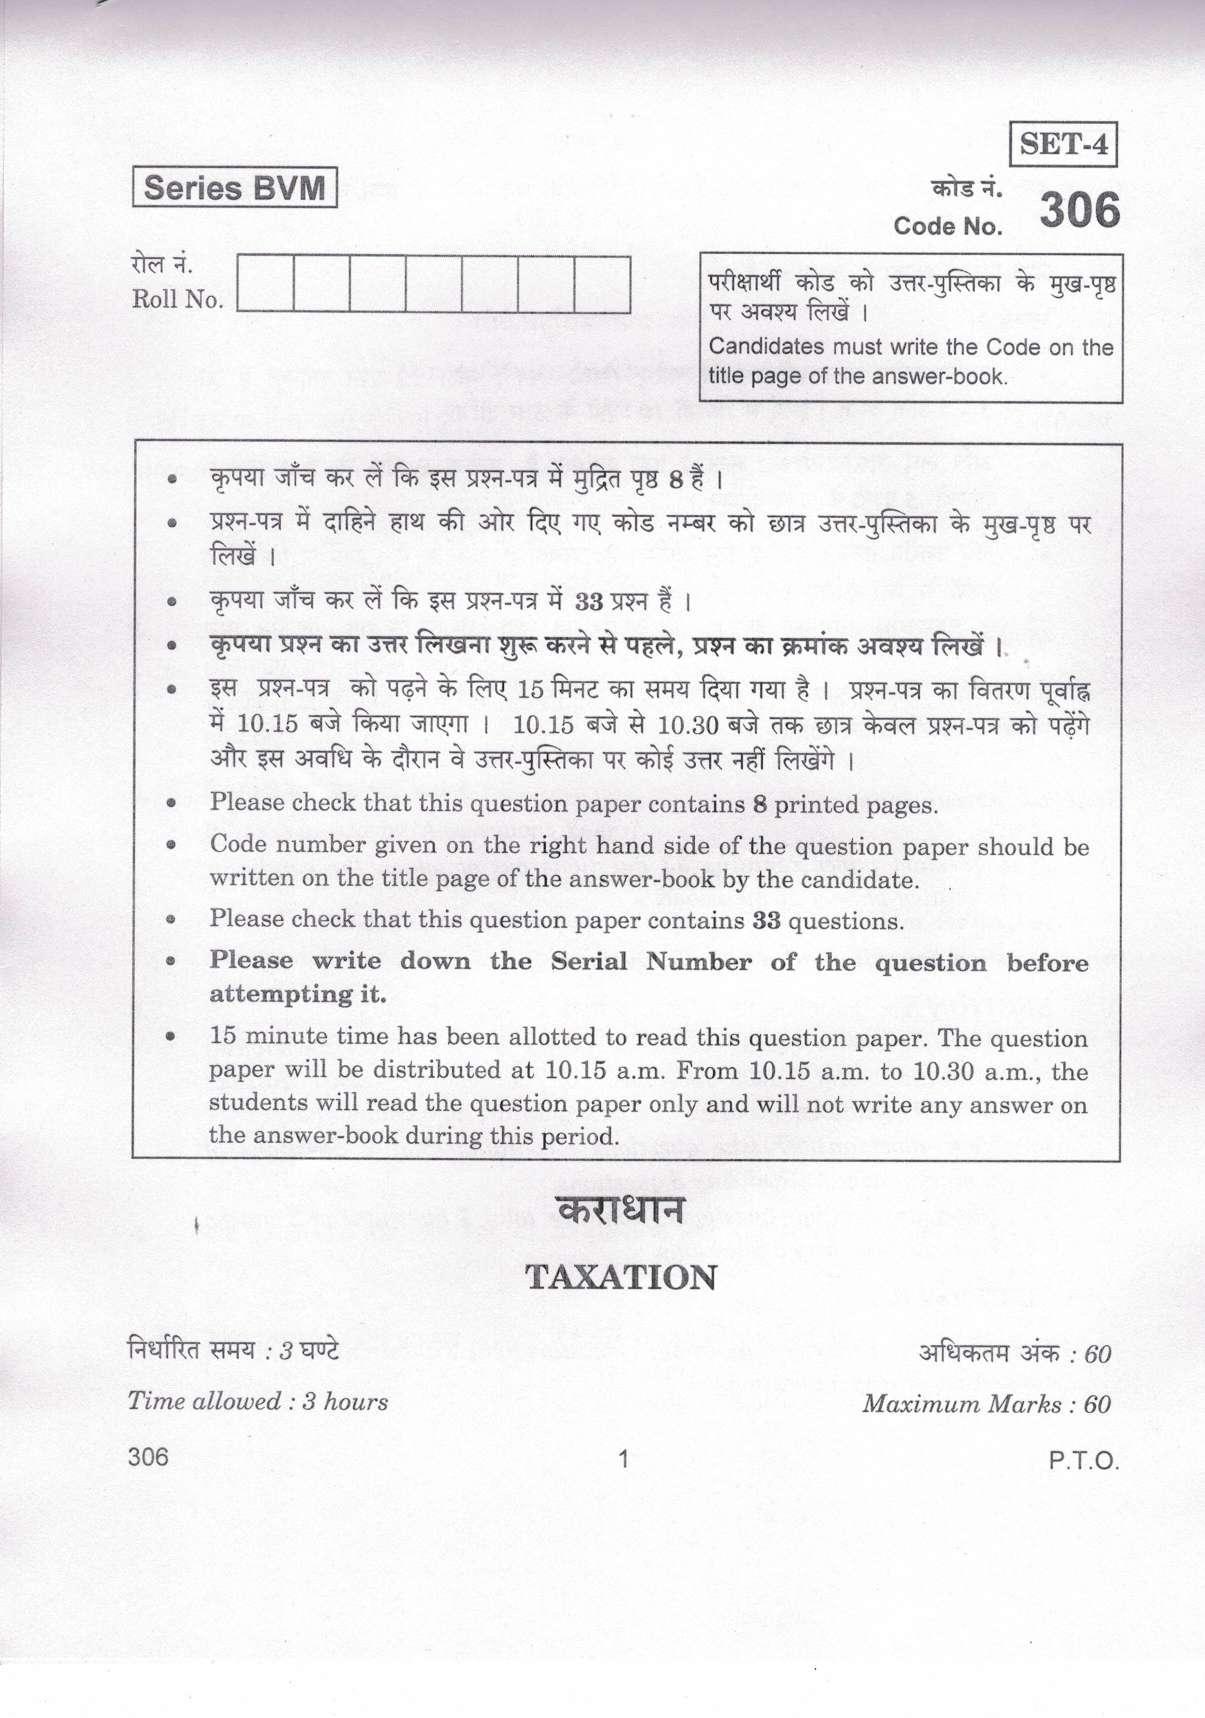 CBSE Class 12 306 Taxation_compressed 2019 Question Paper - Page 1